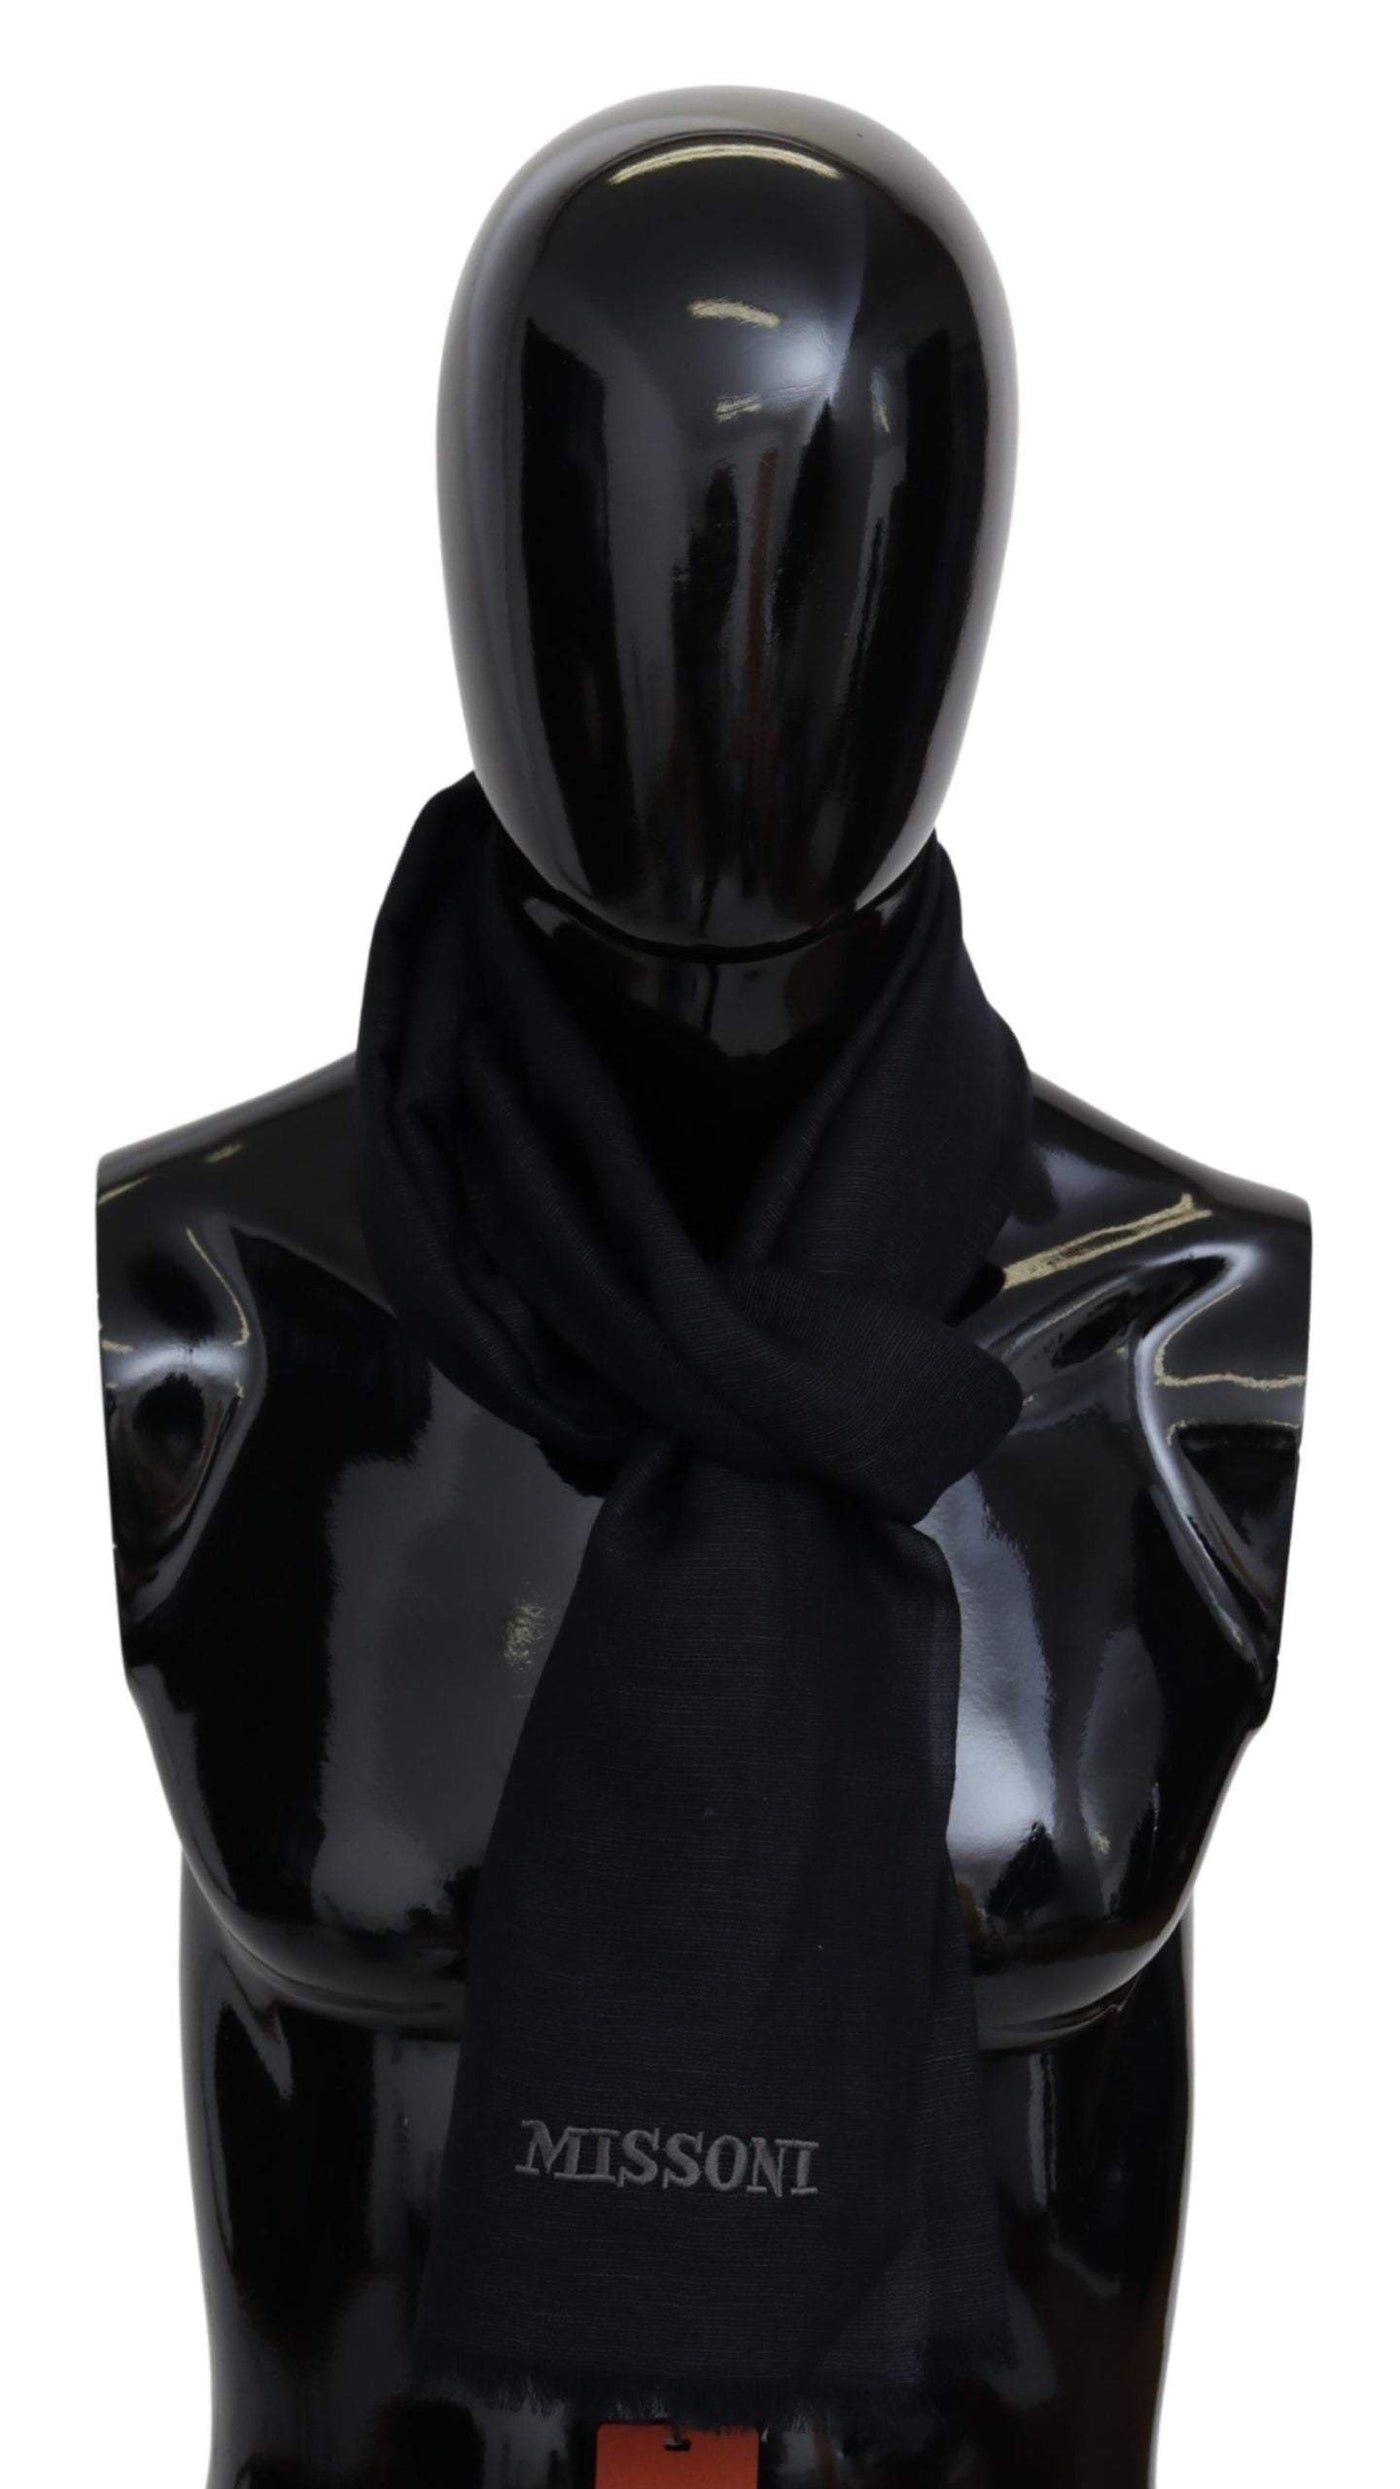 Missoni Black Wool Knit Unisex Neck Wrap Fringe Scarf #men, Accessories - New Arrivals, Black, feed-agegroup-adult, feed-color-Black, feed-gender-male, Missoni, Scarves - Men - Accessories at SEYMAYKA